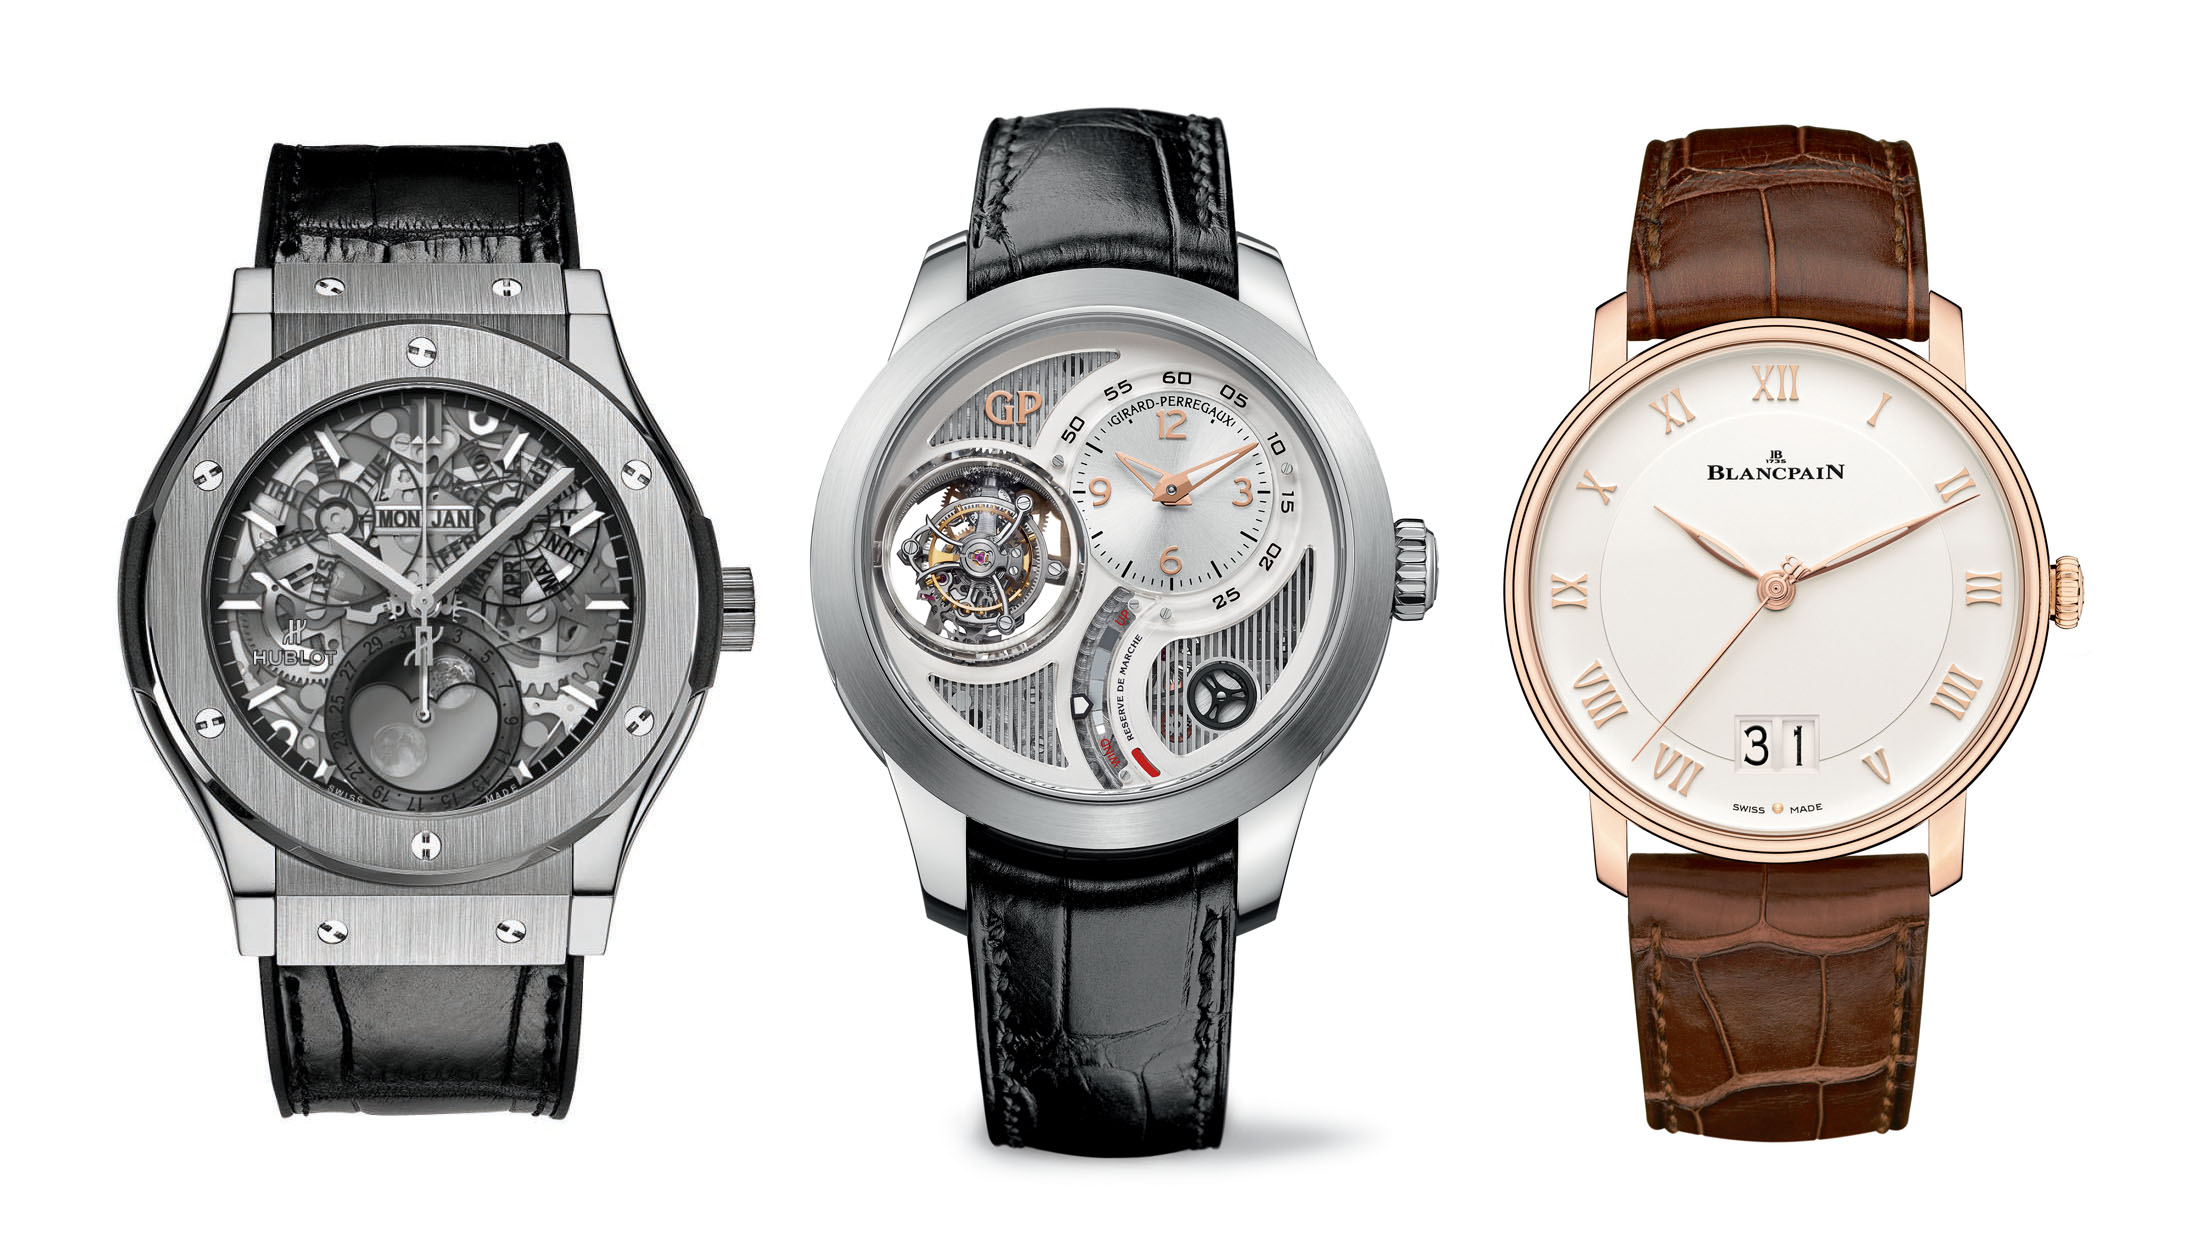 Complex New Watches From Blancpain, Hublot, and Girard-Perregaux ...